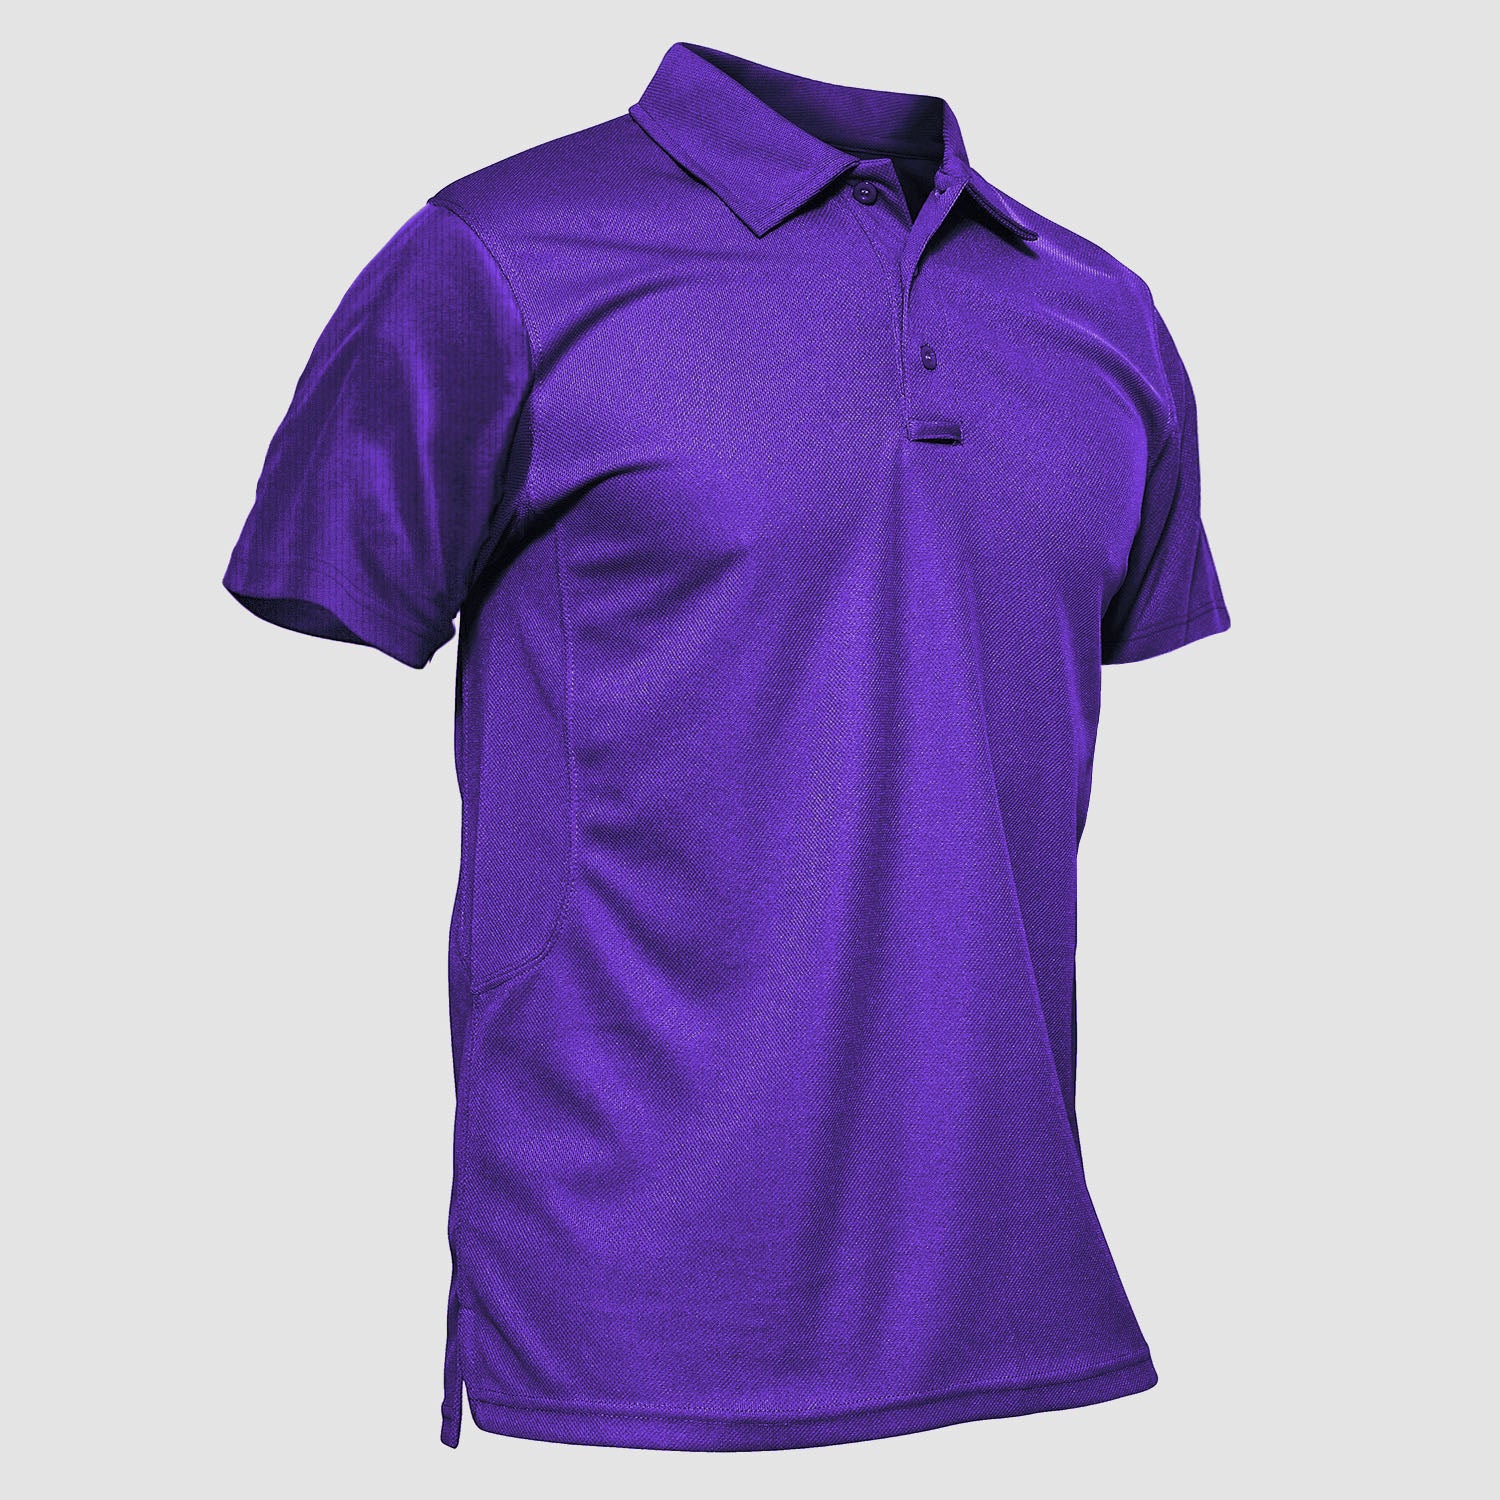 【Buy 4 Get 4th Free】Men's Short Sleeve Polo T-shirt Quick Dry